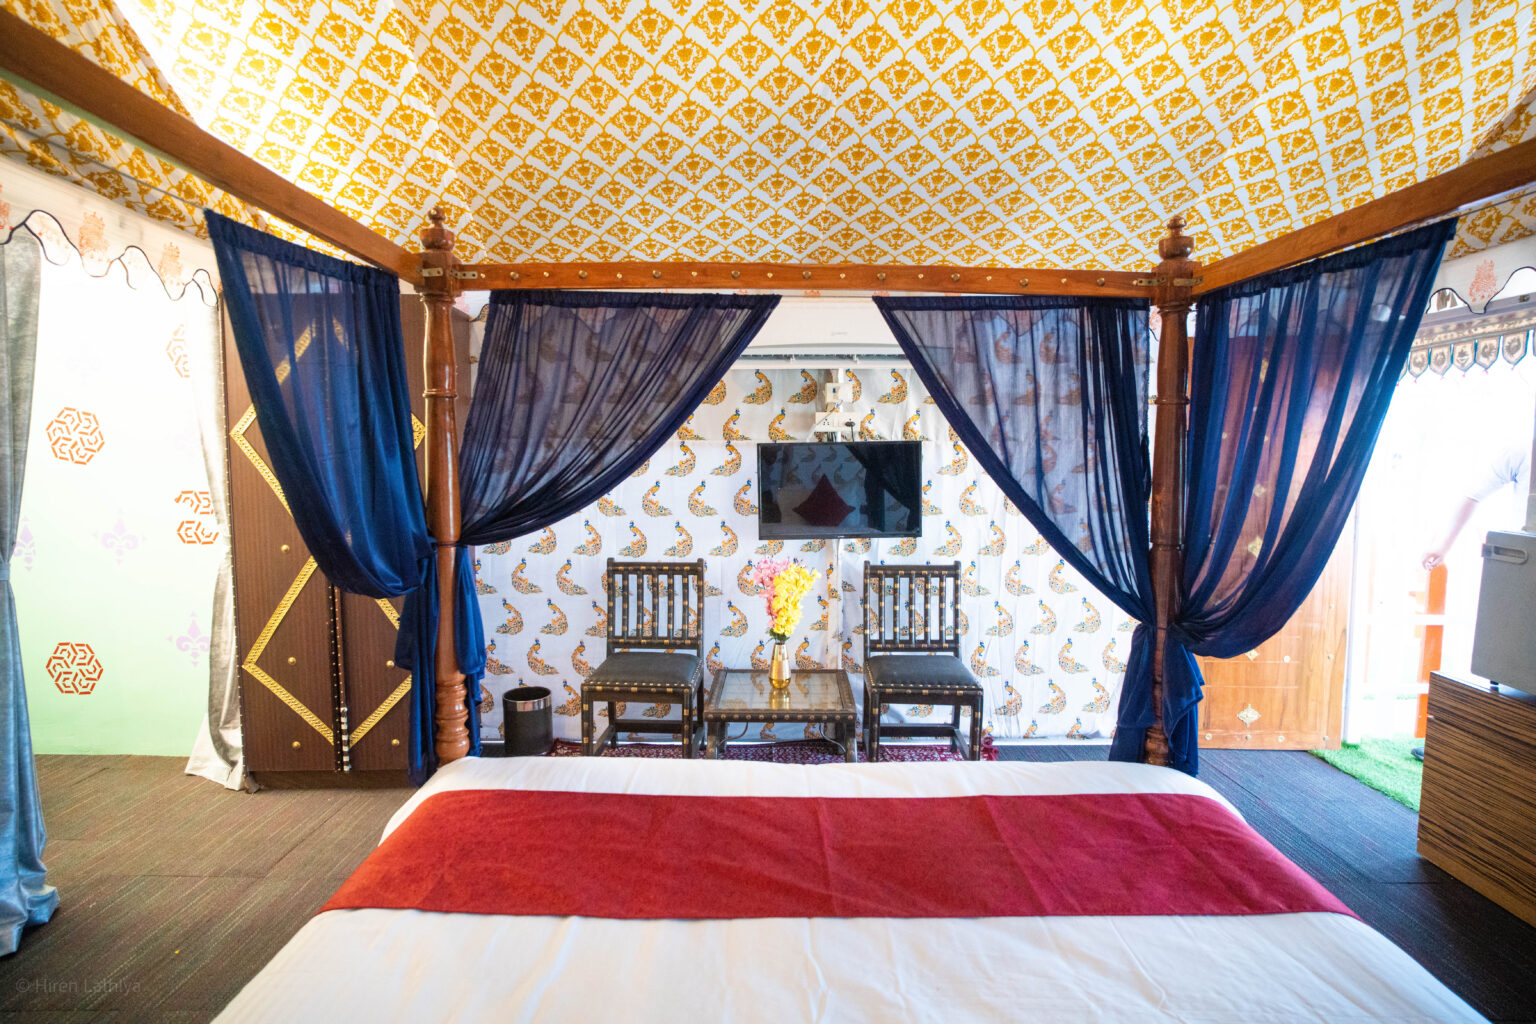 <span  class="uc_style_uc_tiles_grid_image_elementor_uc_items_attribute_title" style="color:#ffffff;">The Royal Heritage Tent Resort</span>